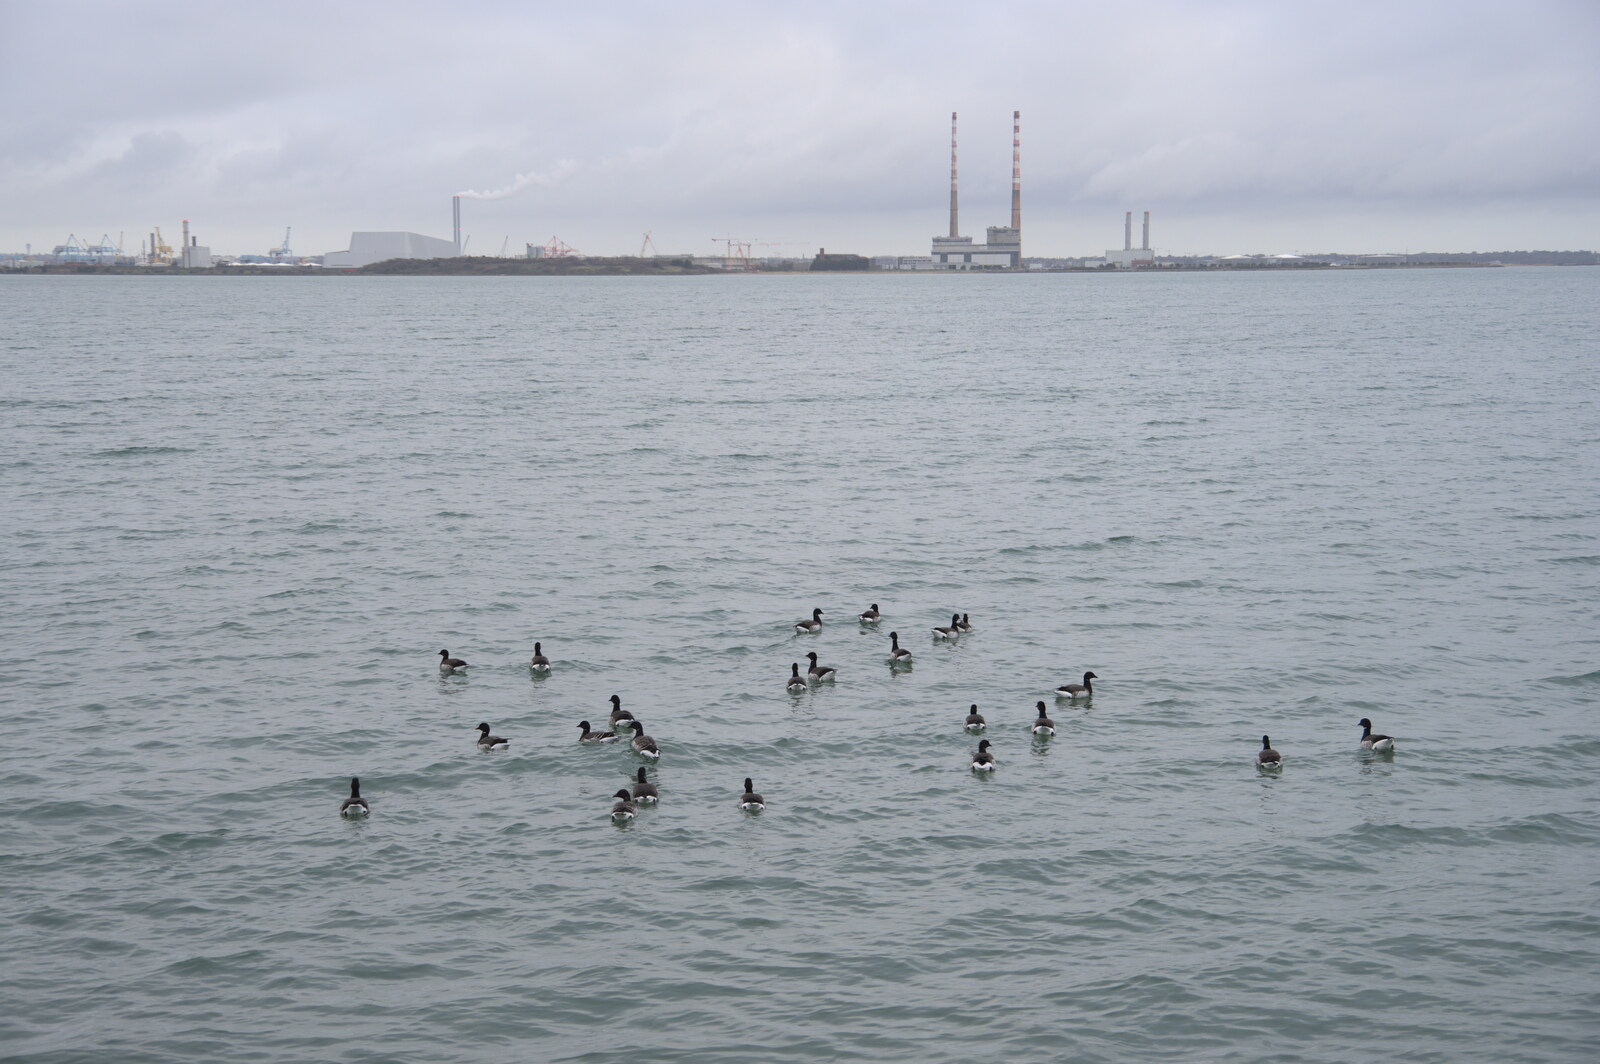 The End of the Breffni, Blackrock, Dublin - 18th February 2023: A load of geese float around in Dublin Bay